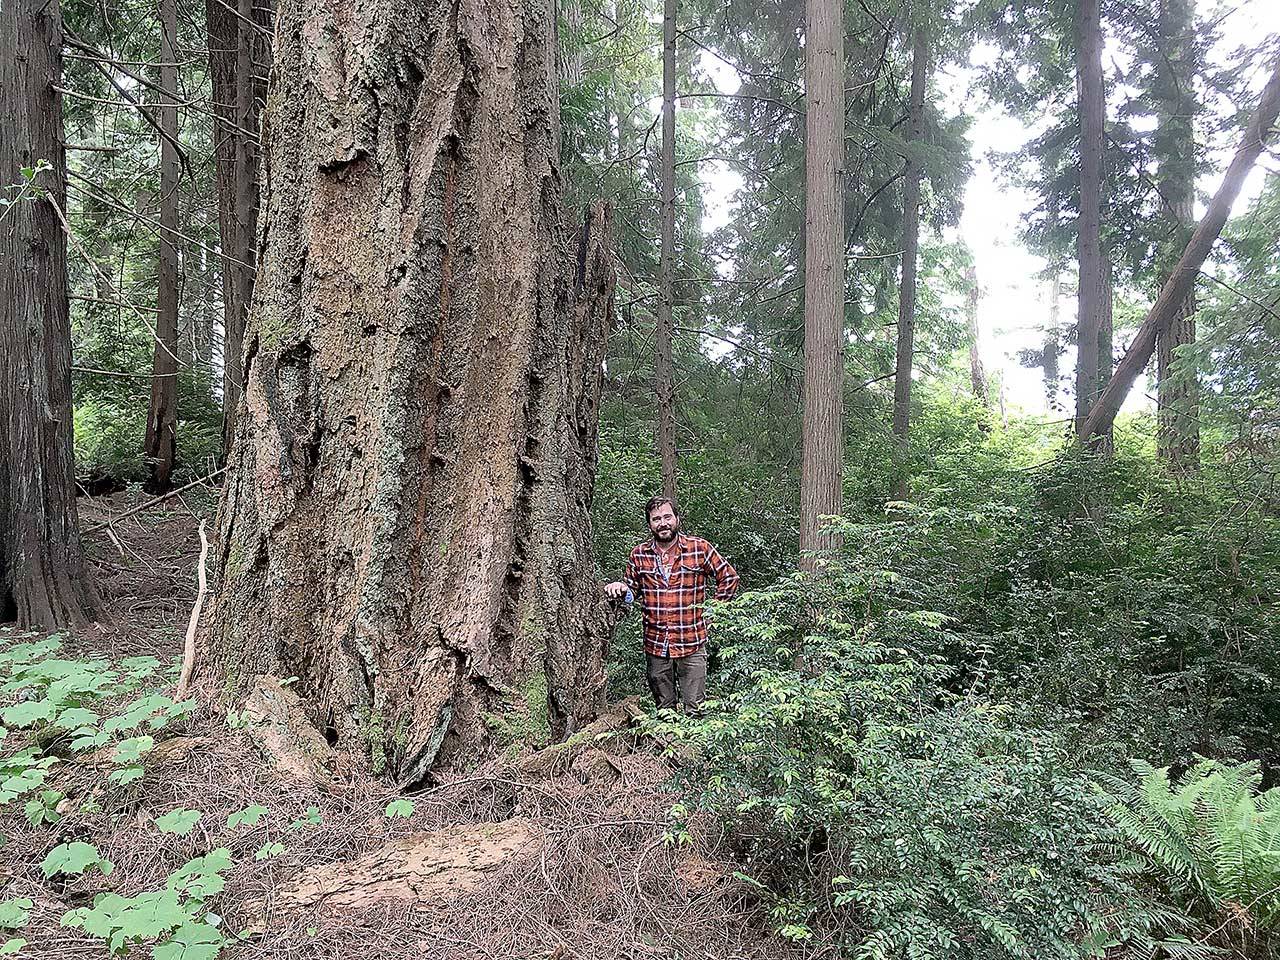 Jefferson County Commissioner Greg Brotherton views old growth Douglas fir on a field tour of rare forest proposed for protection as part of Dabob Bay Natural Area. (Photo courtesy of Northwest Watershed Institute)